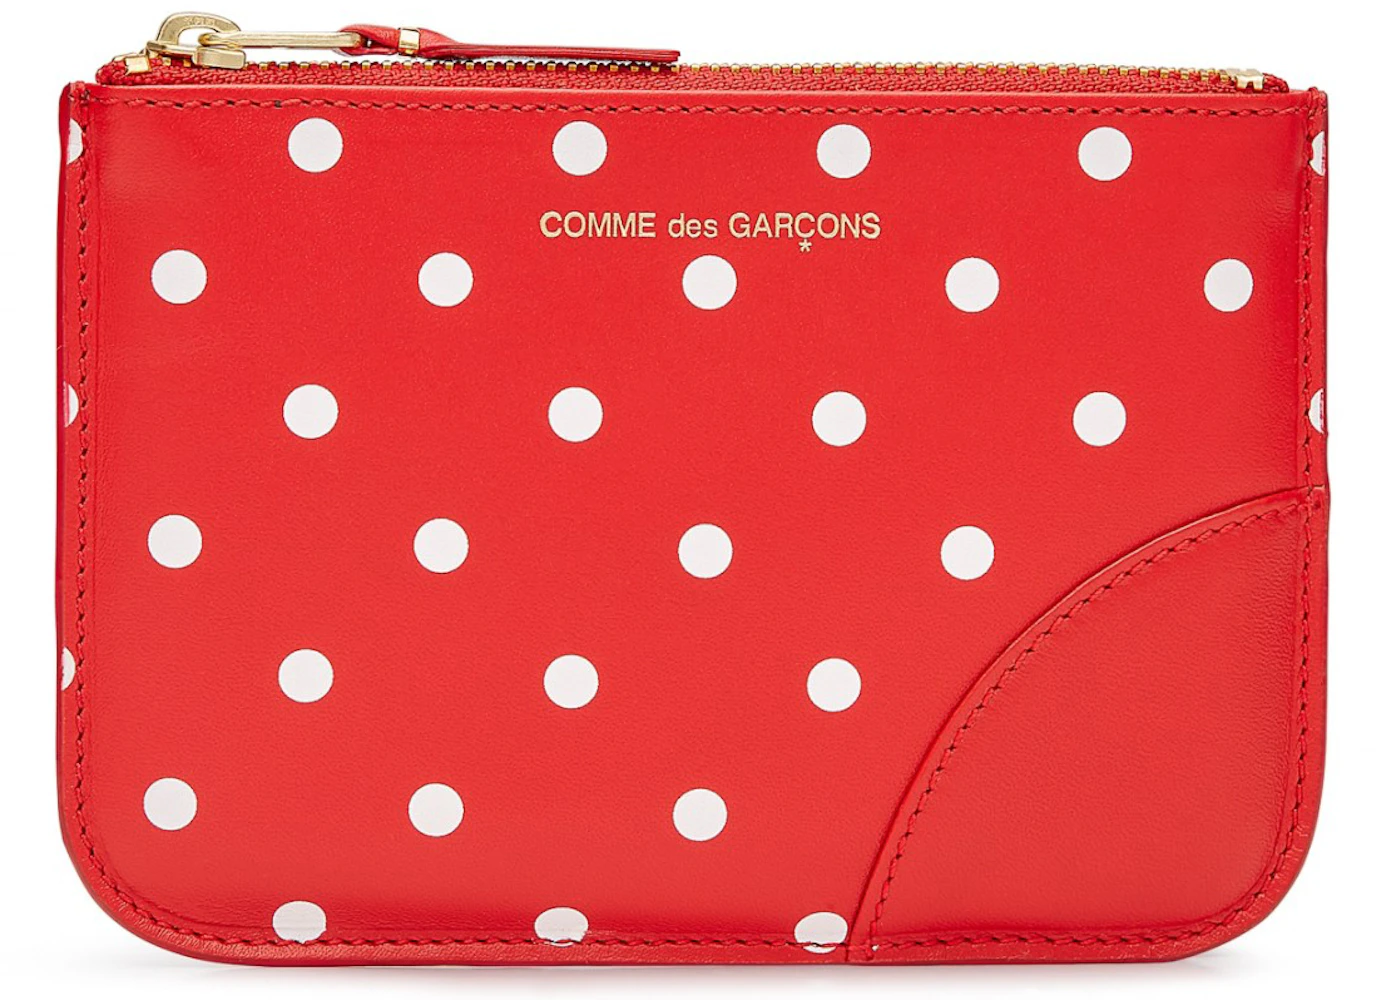 Comme des Garcons SA8100PD Wallet Polka Dots Red in Leather with Gold ...